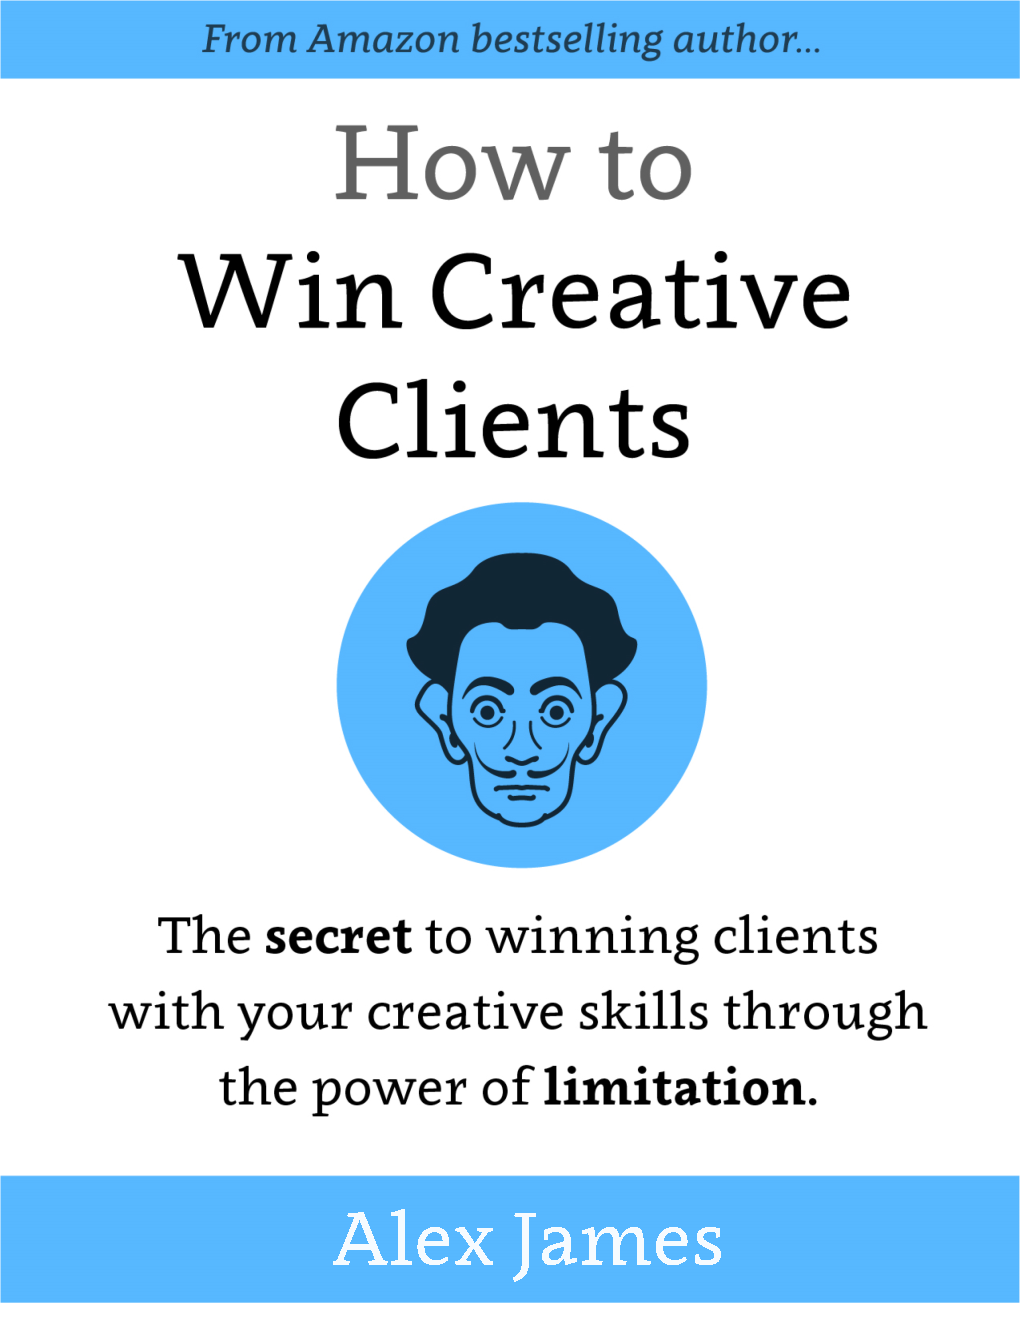 How-To-Win-Creative-Clients.Pdf